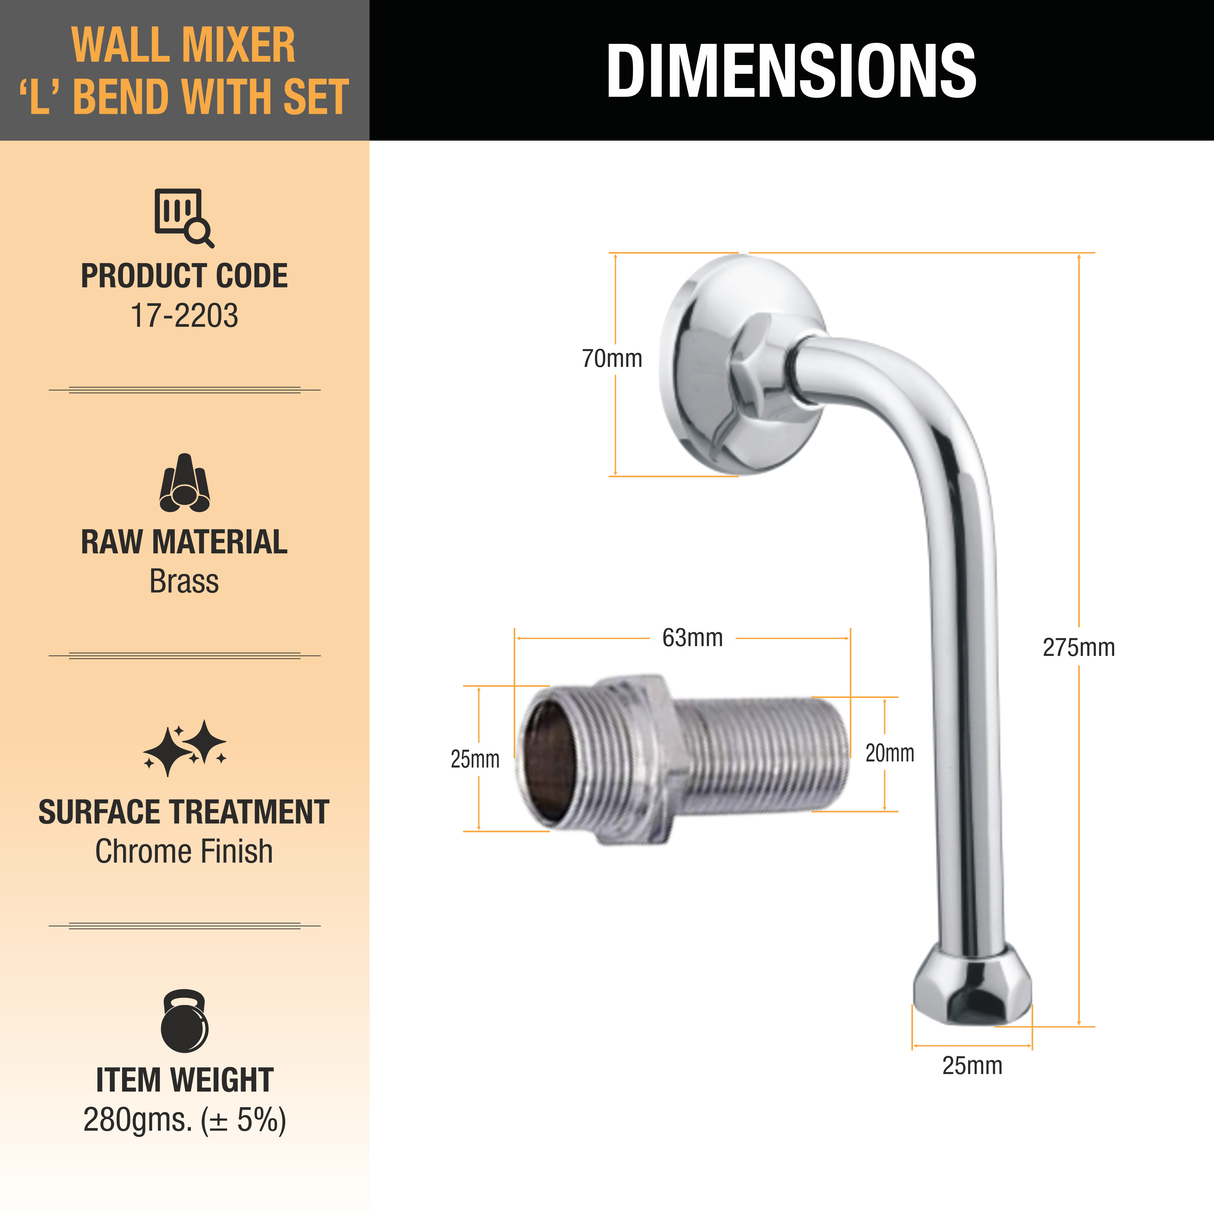 Wall Mixer L Bend with Set sizes